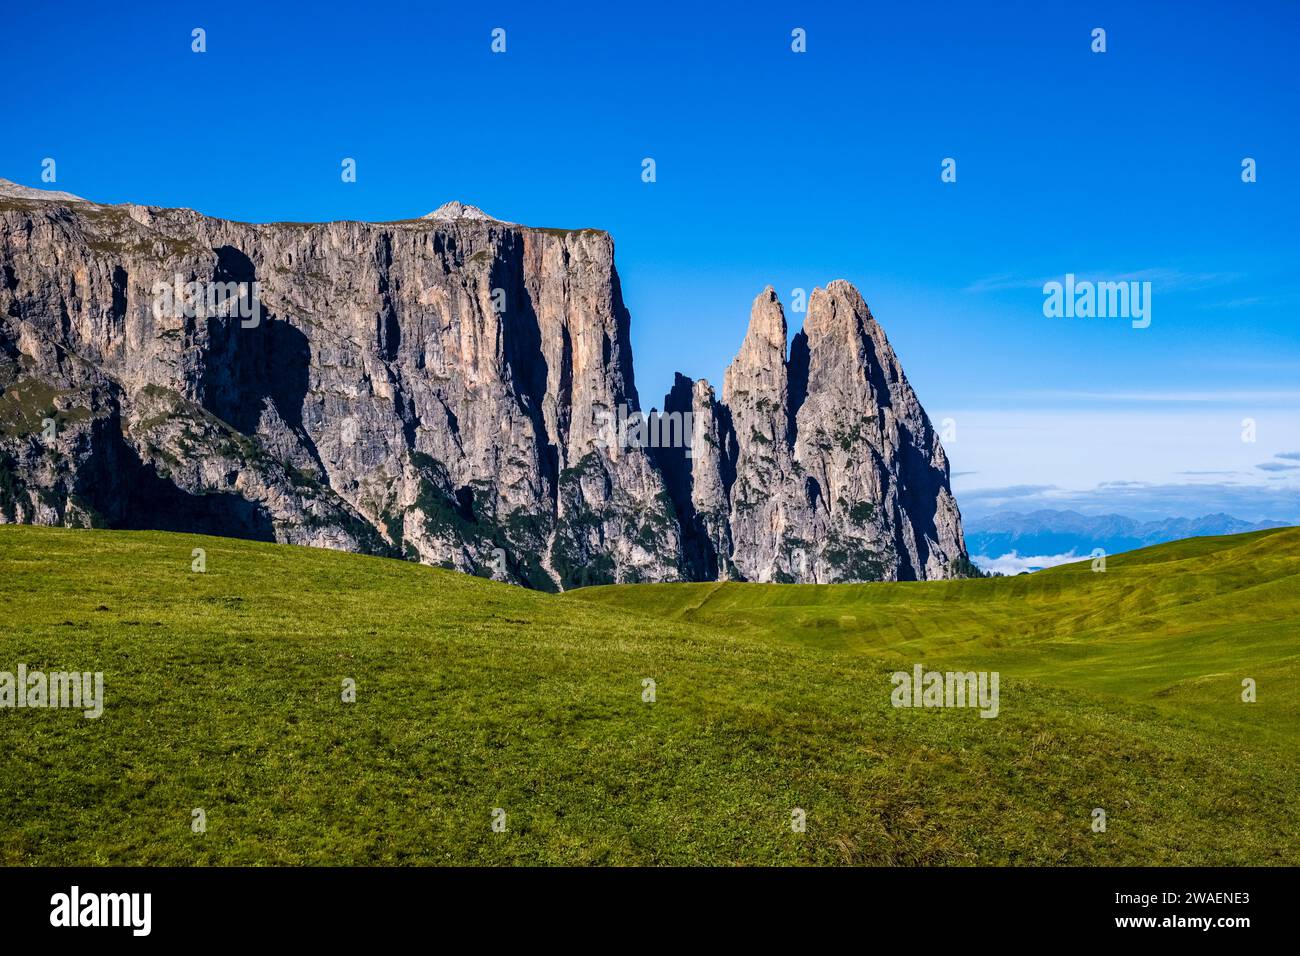 Hilly agricultural countryside with the mountain Schlern, Sciliar at Seiser Alm, Alpe di Siusi. Stock Photo